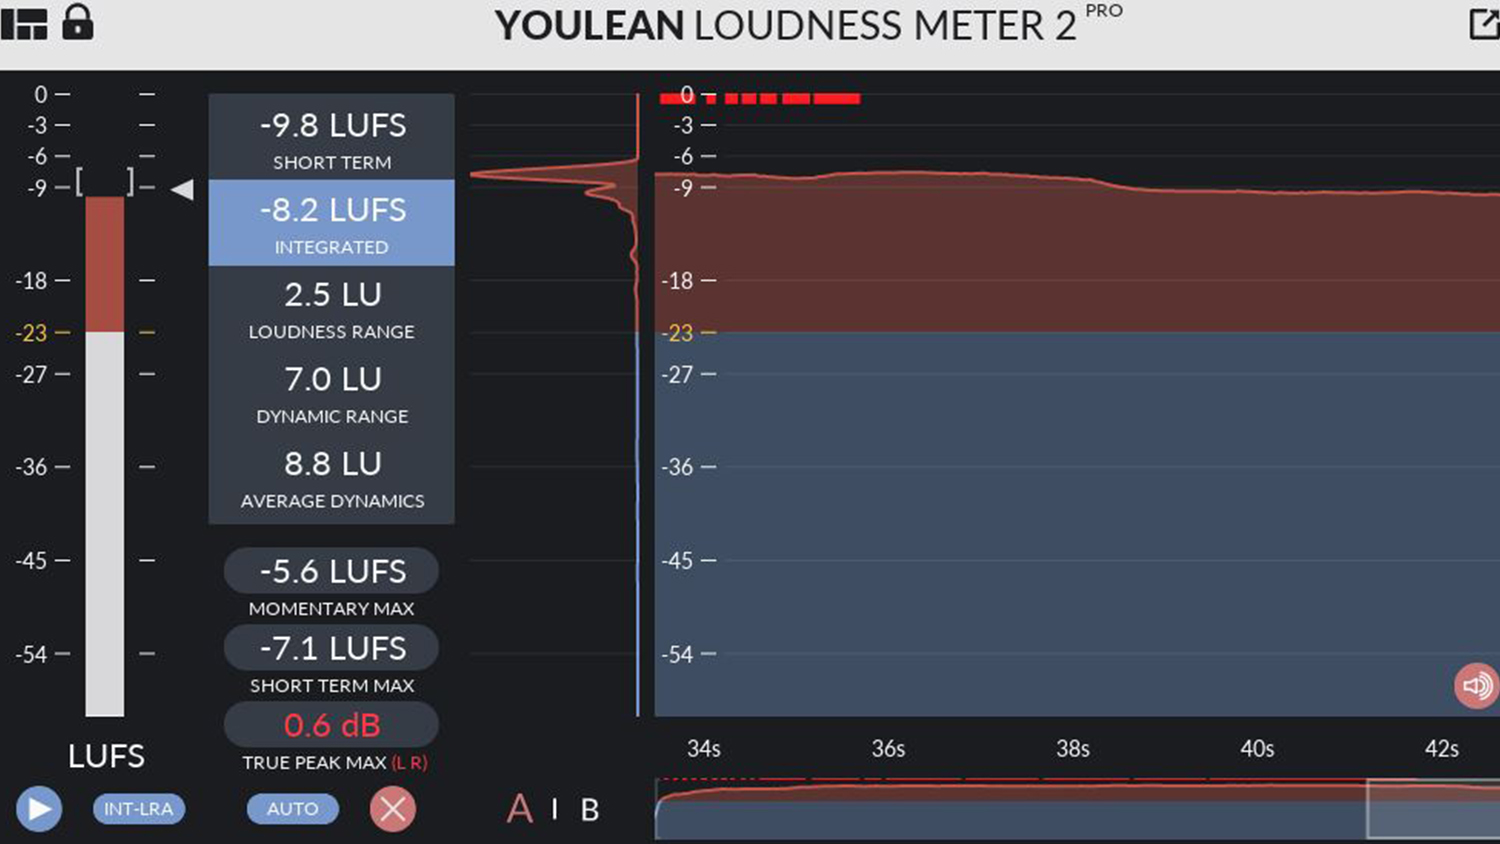 youlean loudness meter 2 pro